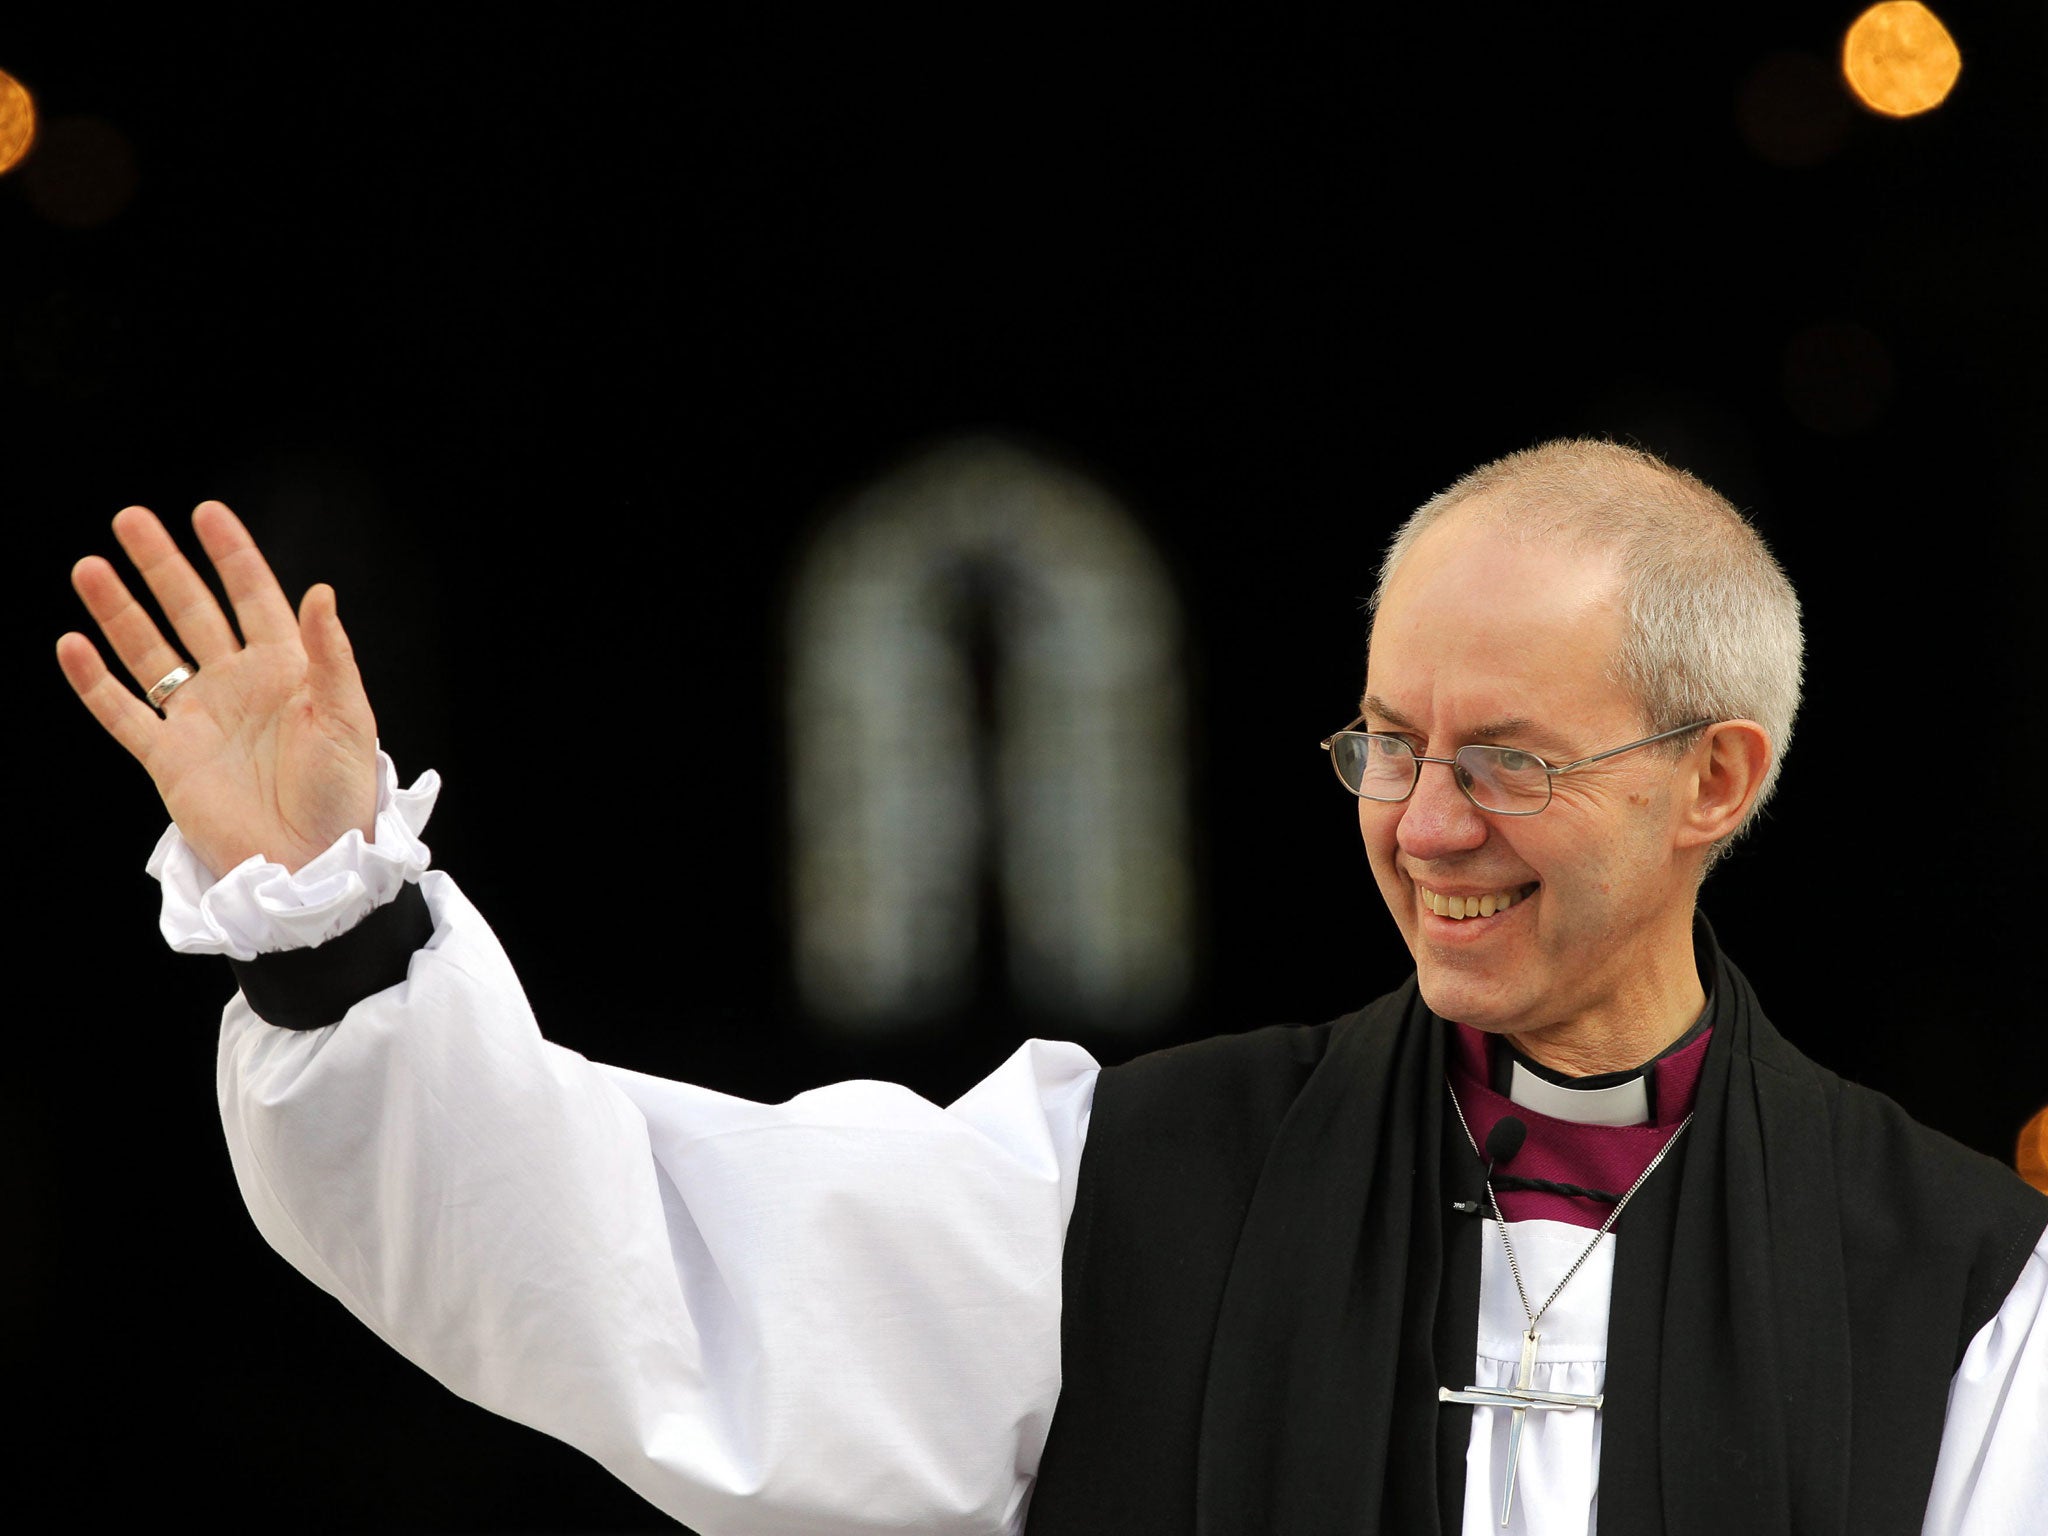 The Most Rev Justin Welby said he backed traditional Church teaching on homosexuality but told BBC News: "You see gay relationships that are just stunning in the quality of the relationship."